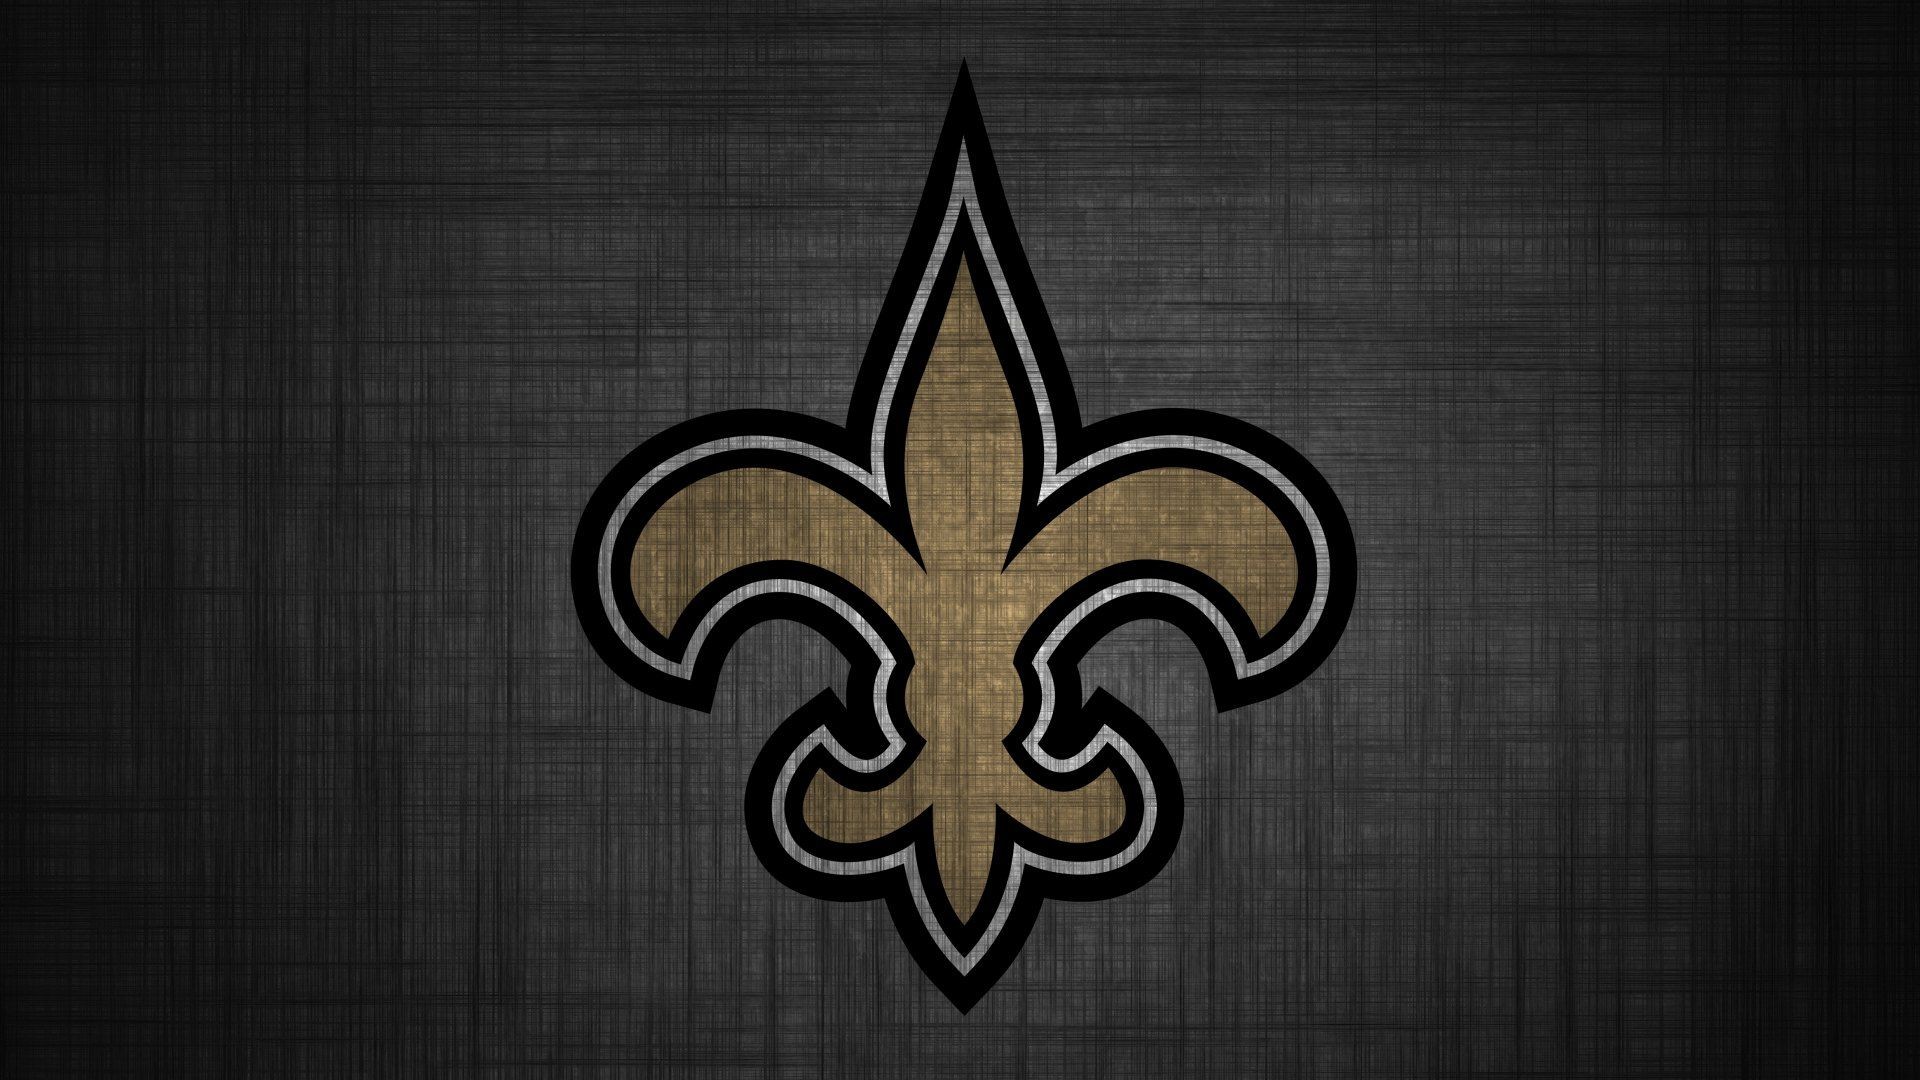 New Orleans Saints NFL Wallpaper HD With Resolution 1920X1080 pixel. You can make this wallpaper for your Mac or Windows Desktop Background, iPhone, Android or Tablet and another Smartphone device for free